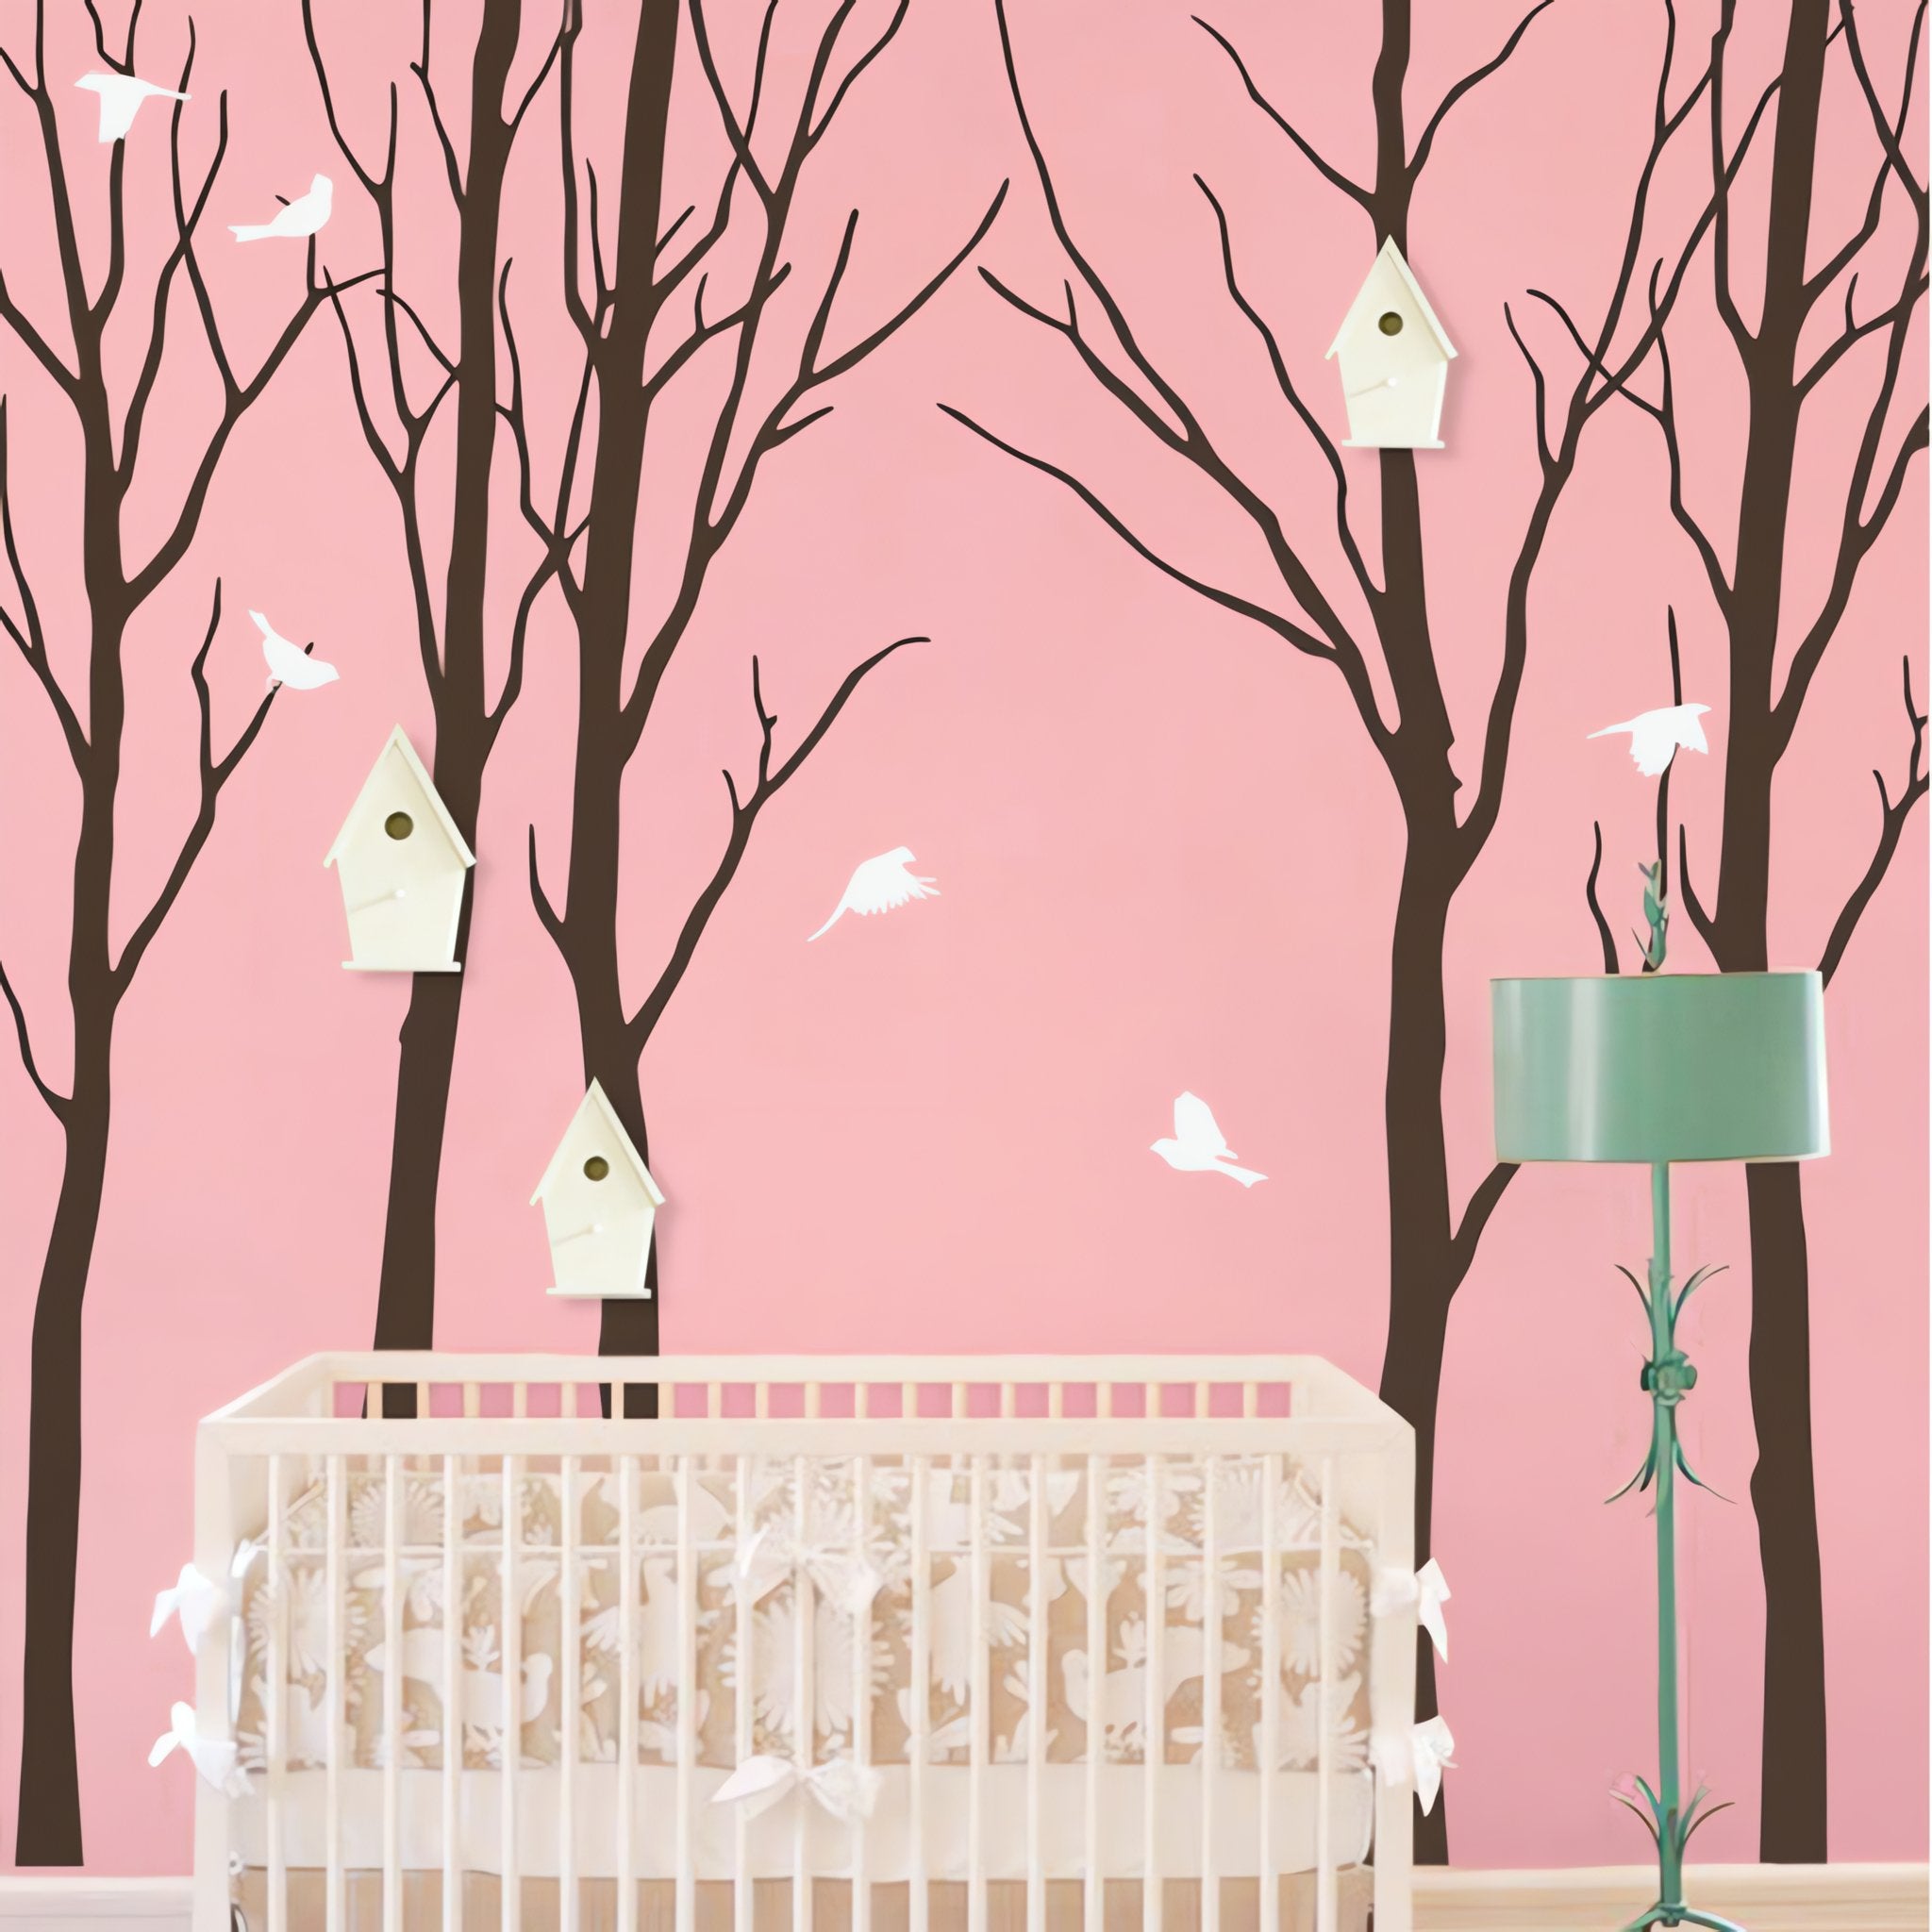 Tree wall sticker with birds and birdhouses in a nursery with a crib and a floorlamp.